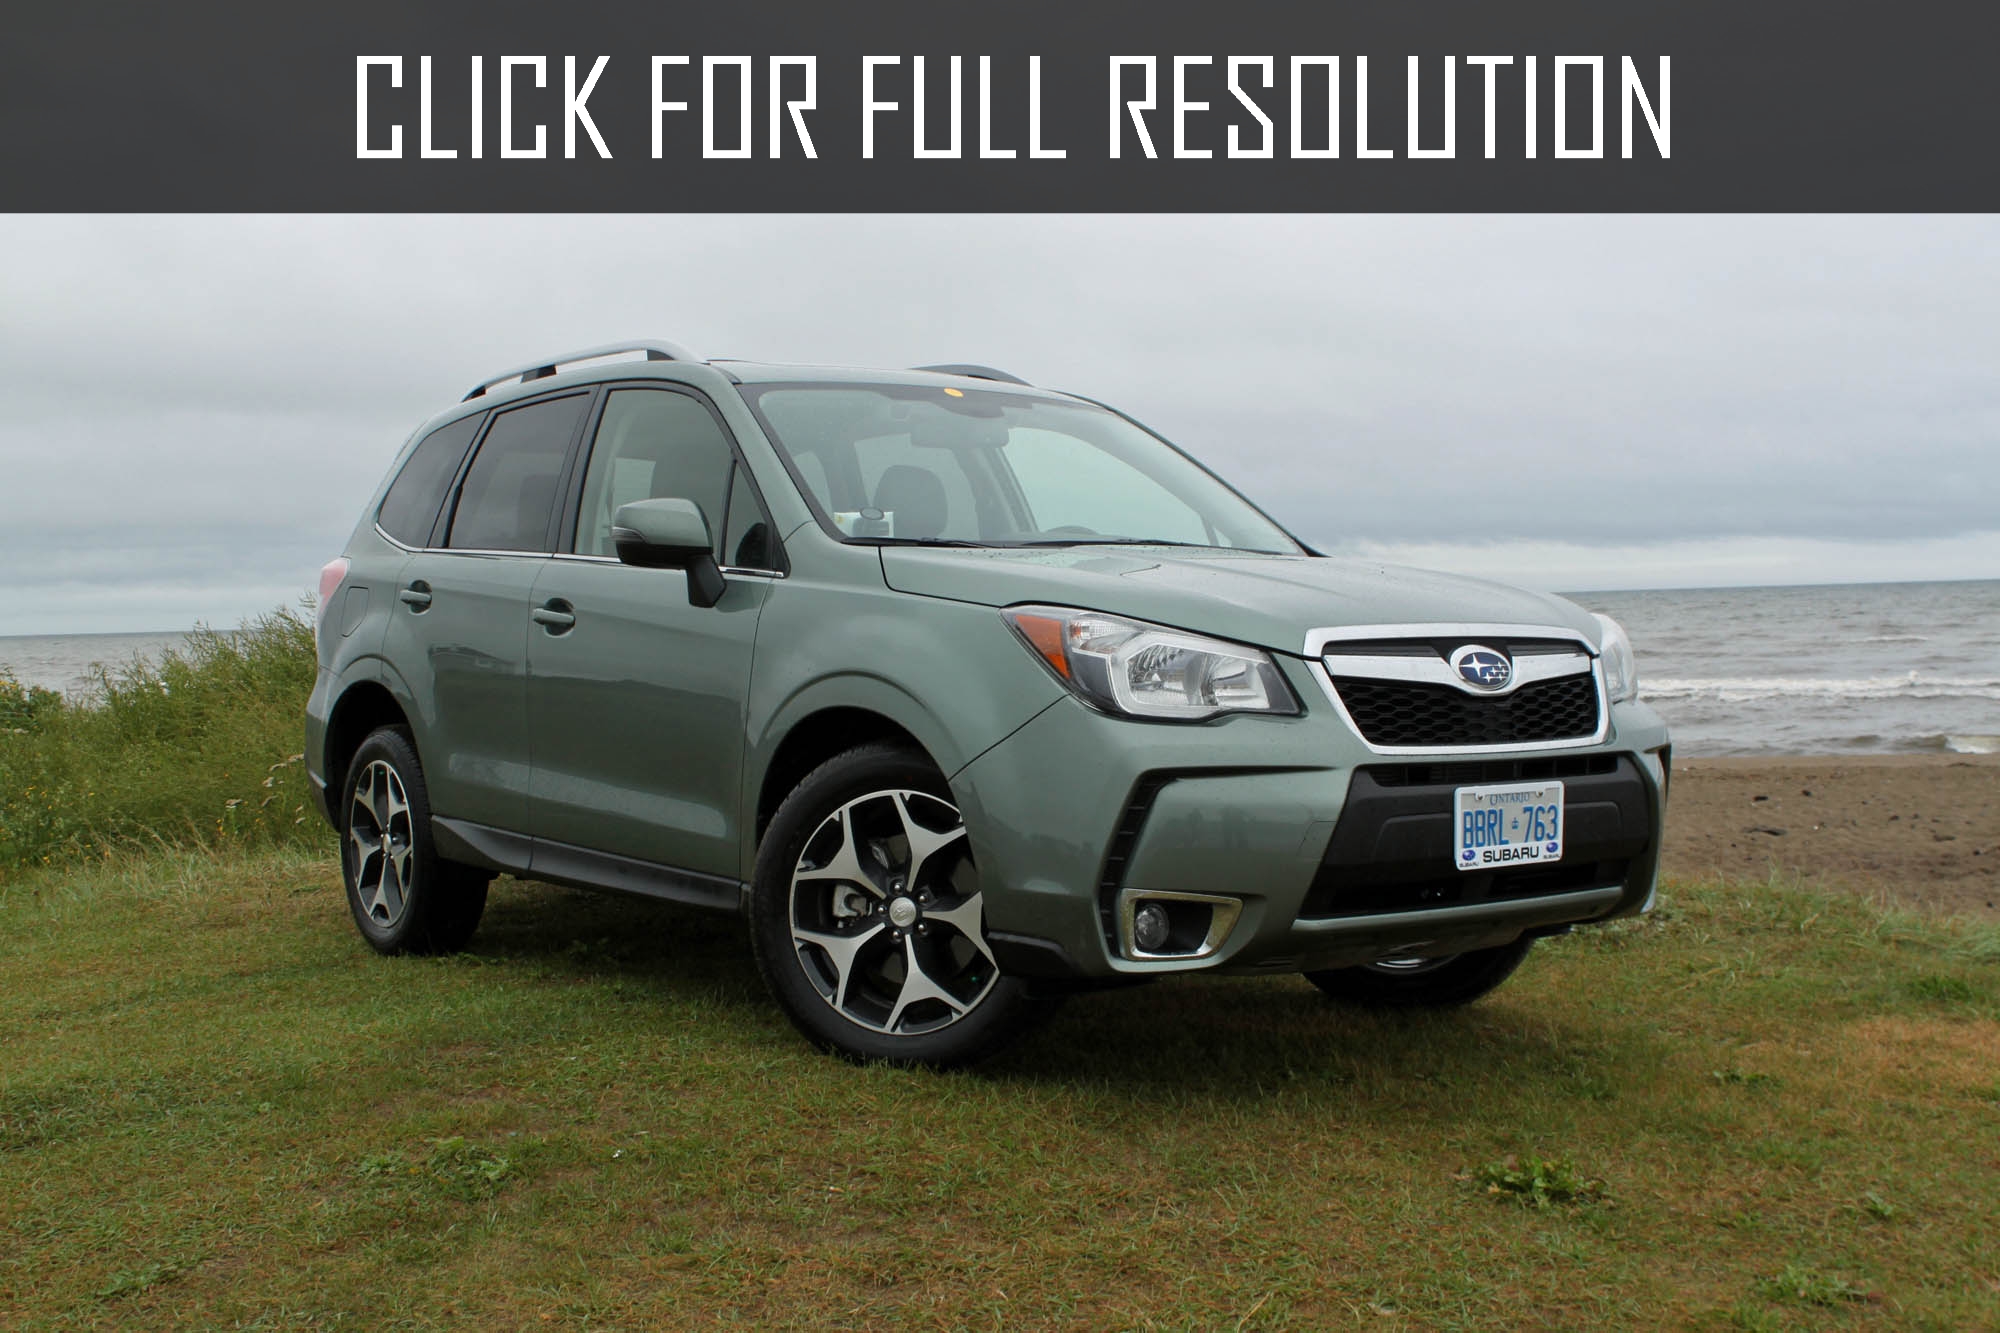 2016 Subaru Forester news, reviews, msrp, ratings with